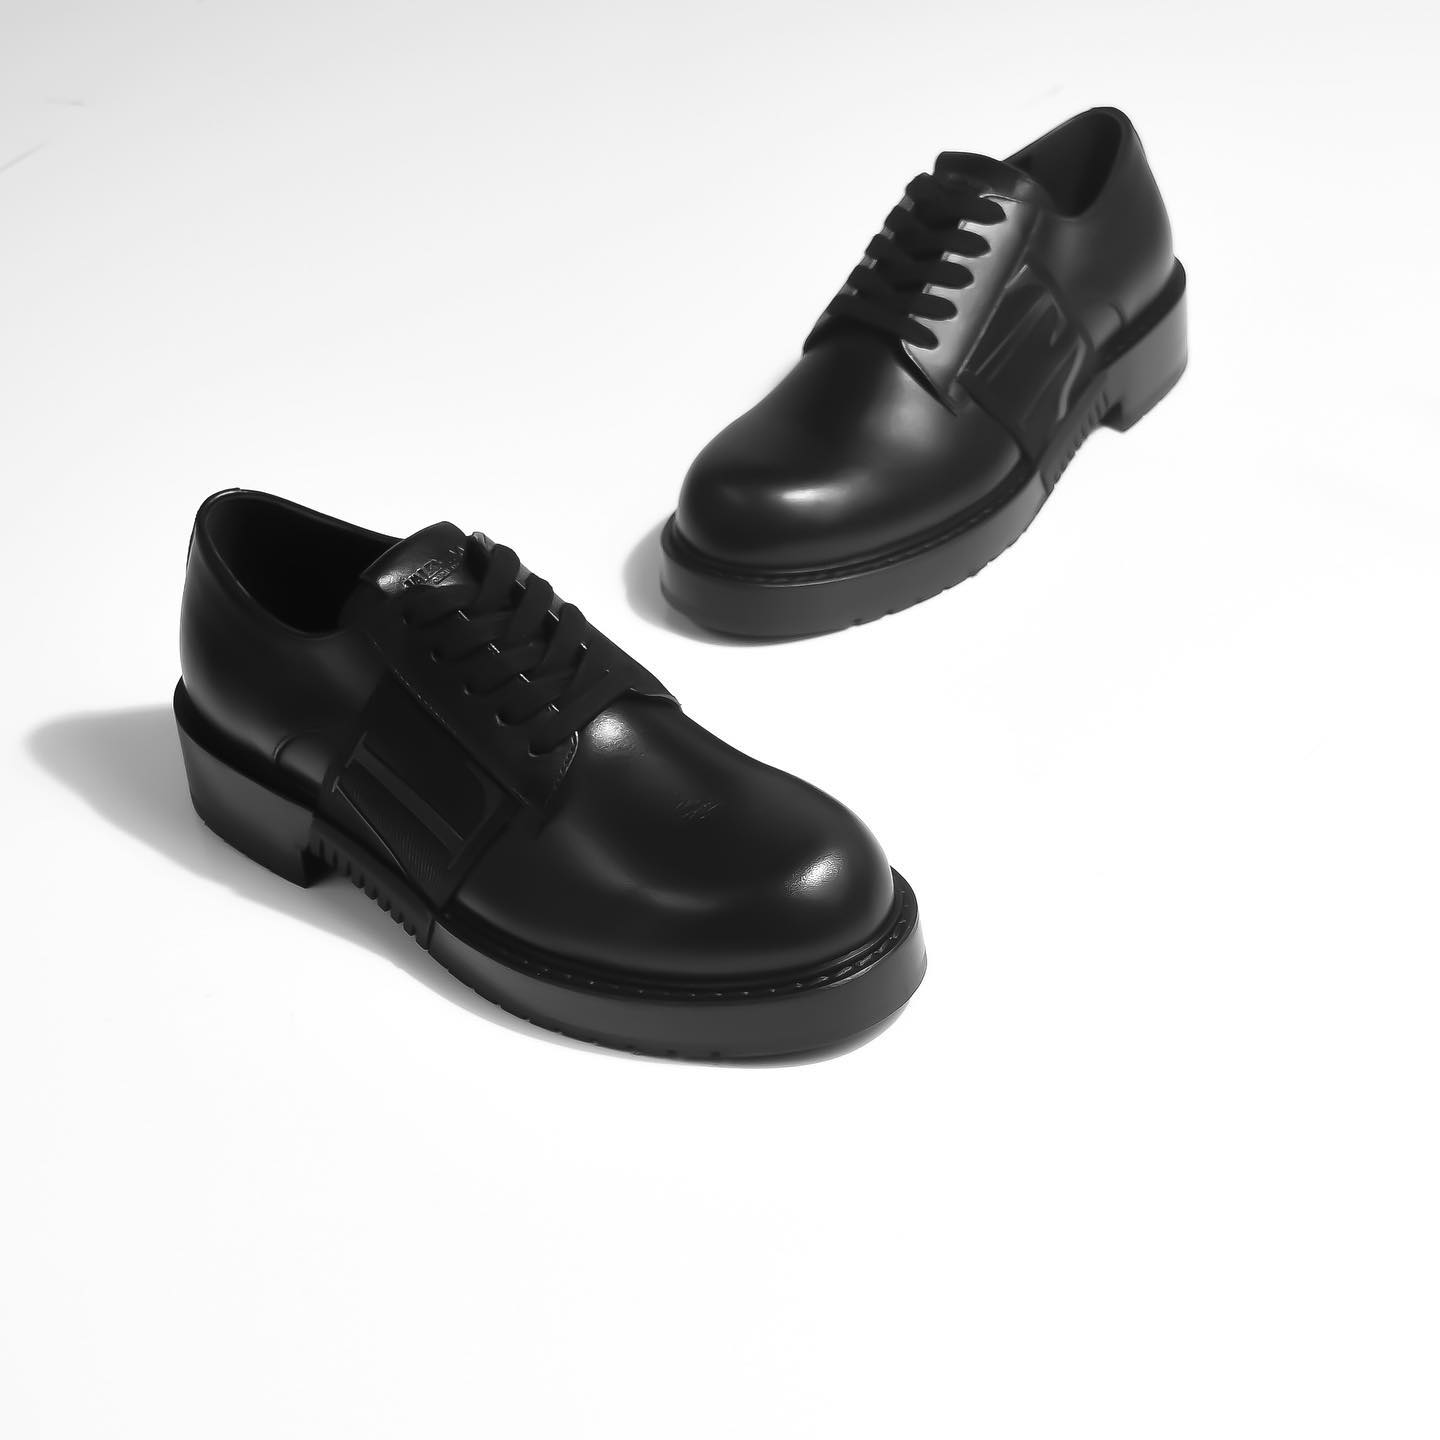 LOAFER valentino welcomes the derby shoe to their VL7N family. DFKSGHDFHAFSD.jpg